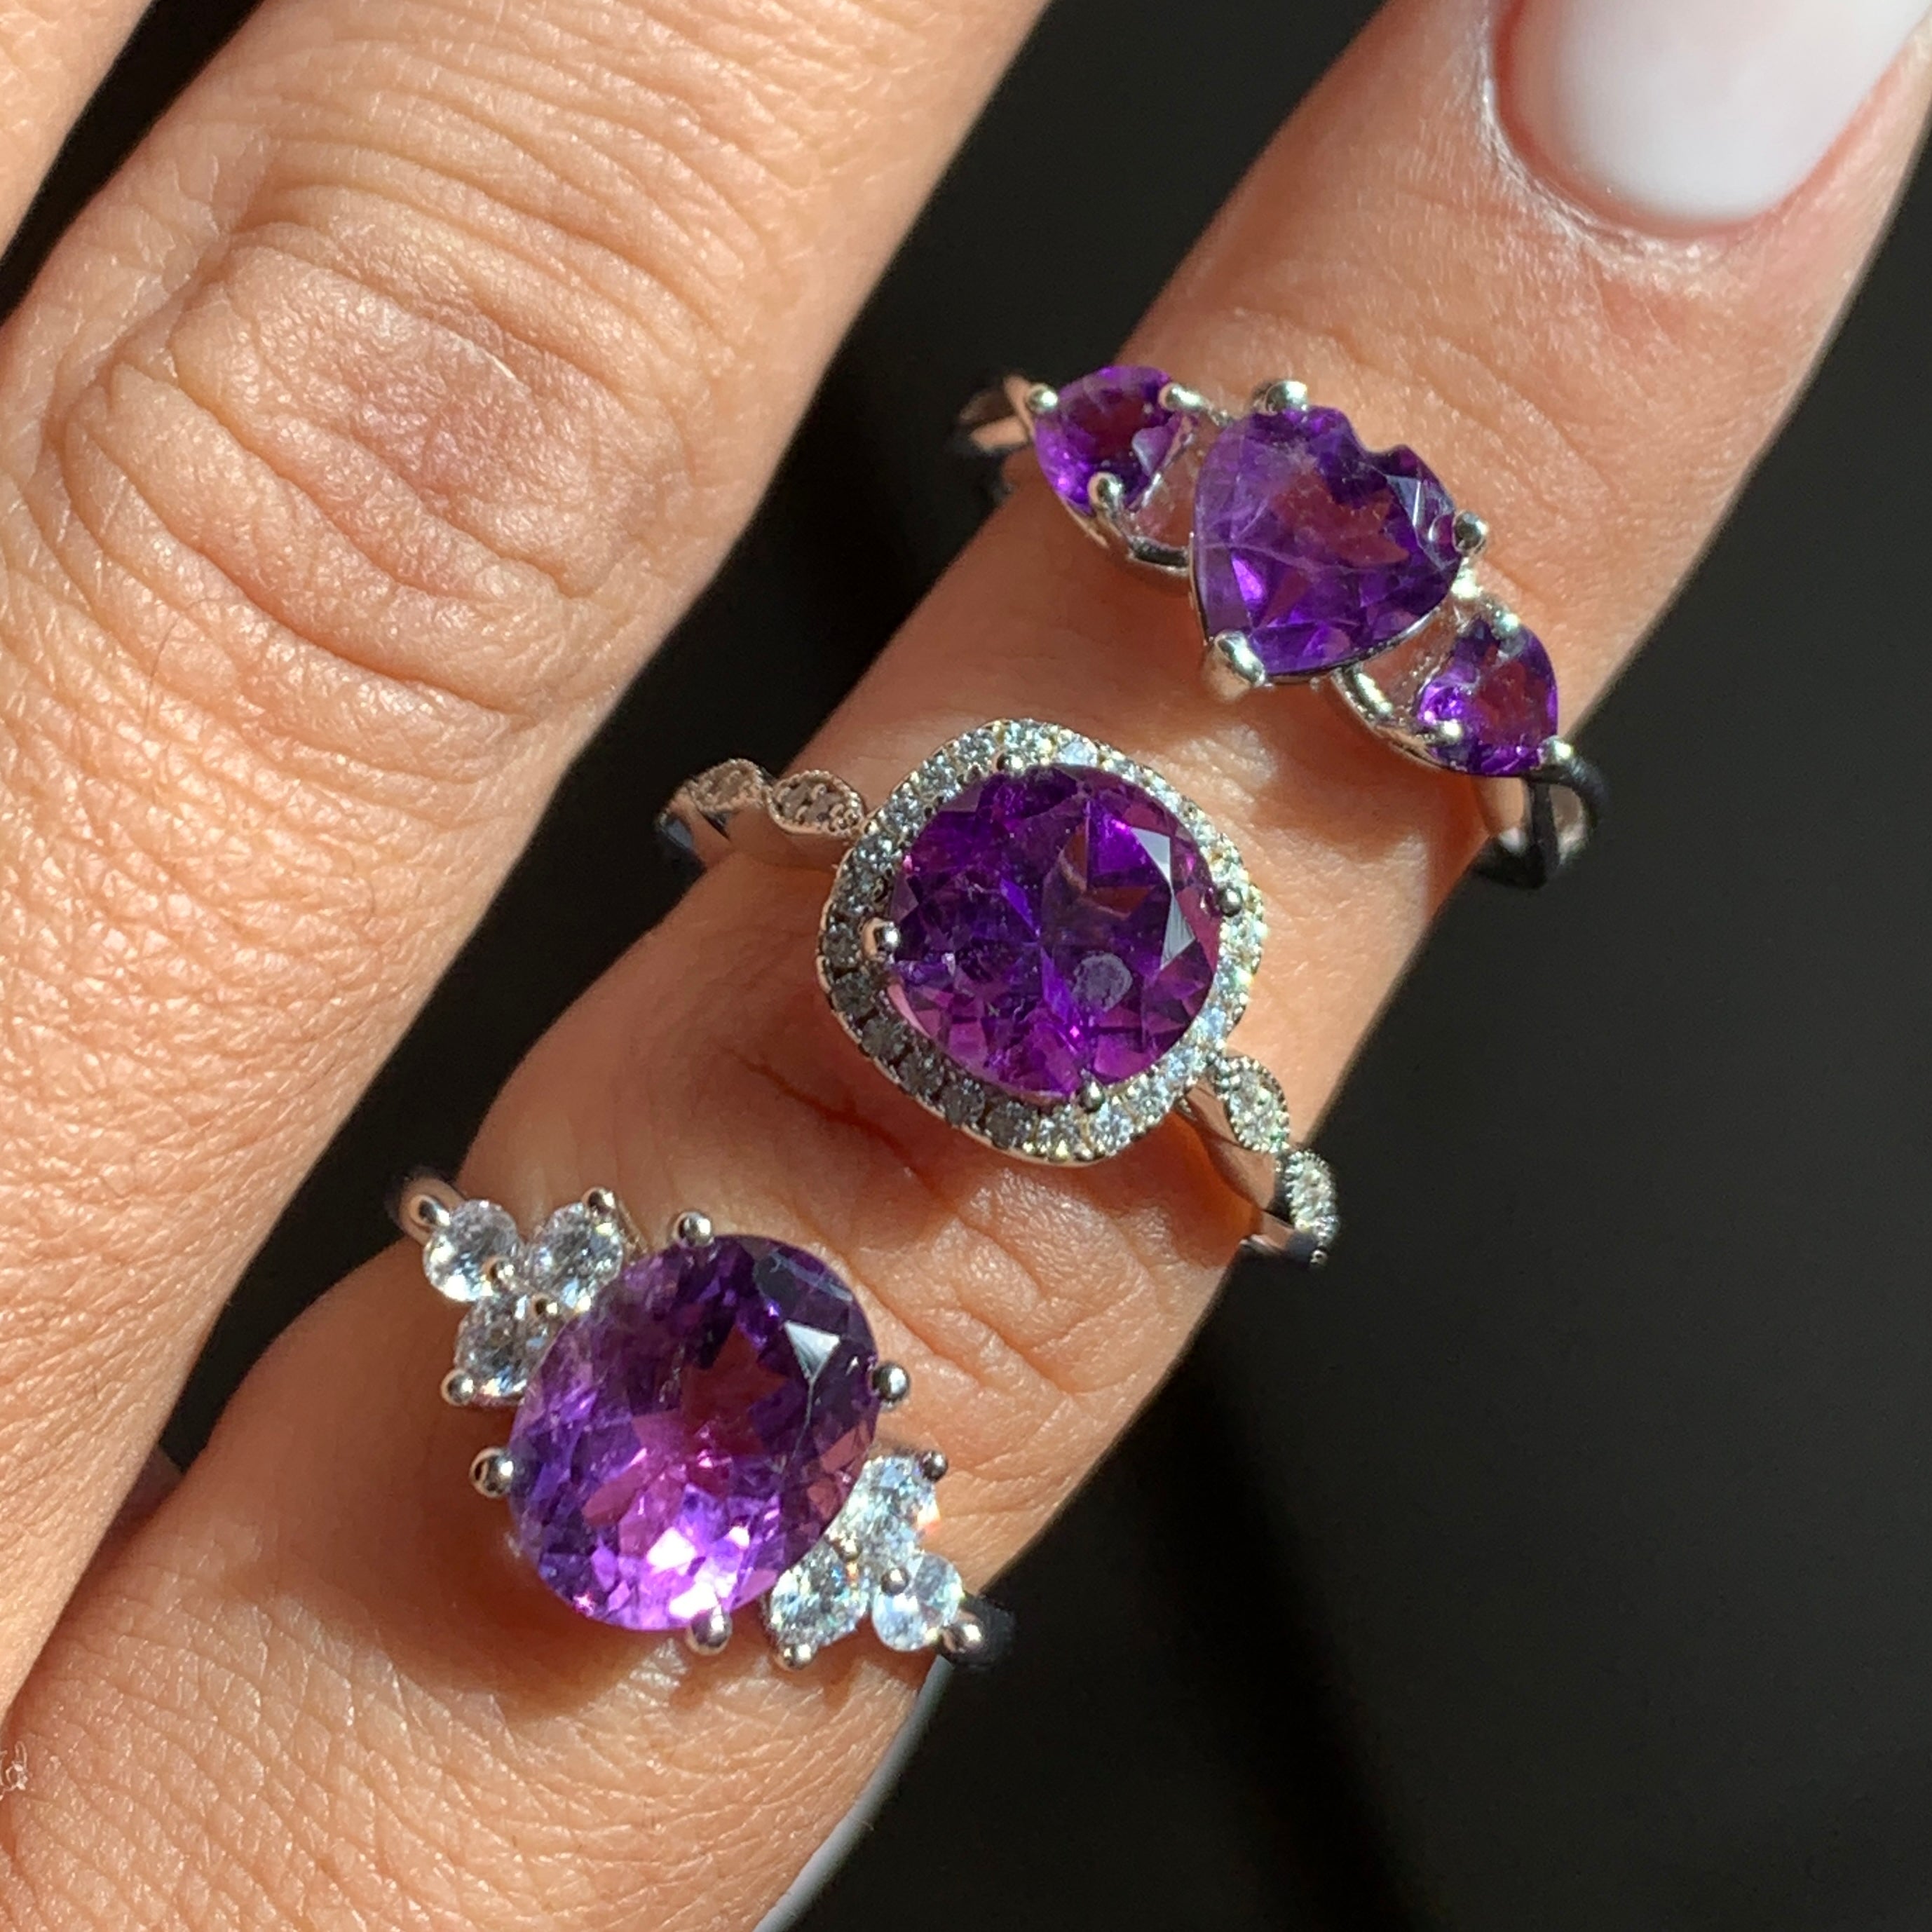 February birthstone: Amethyst jewellery pieces to get for your birth month